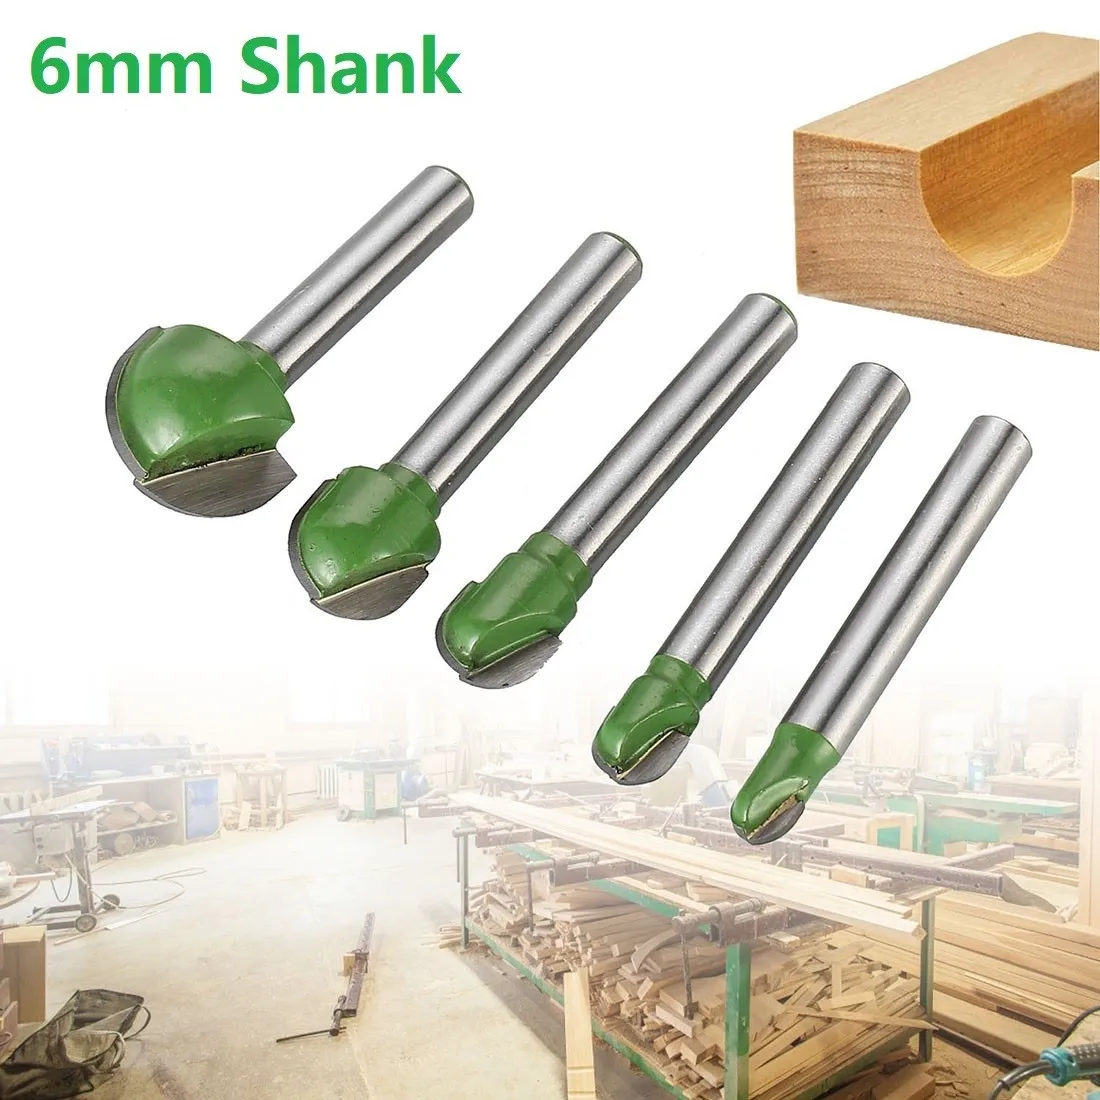 

6-18mm Ball Nose End Mill Router Bit Round Nose Cove Core Woodworking CNC Wood Milling Cutter 6mm Shank